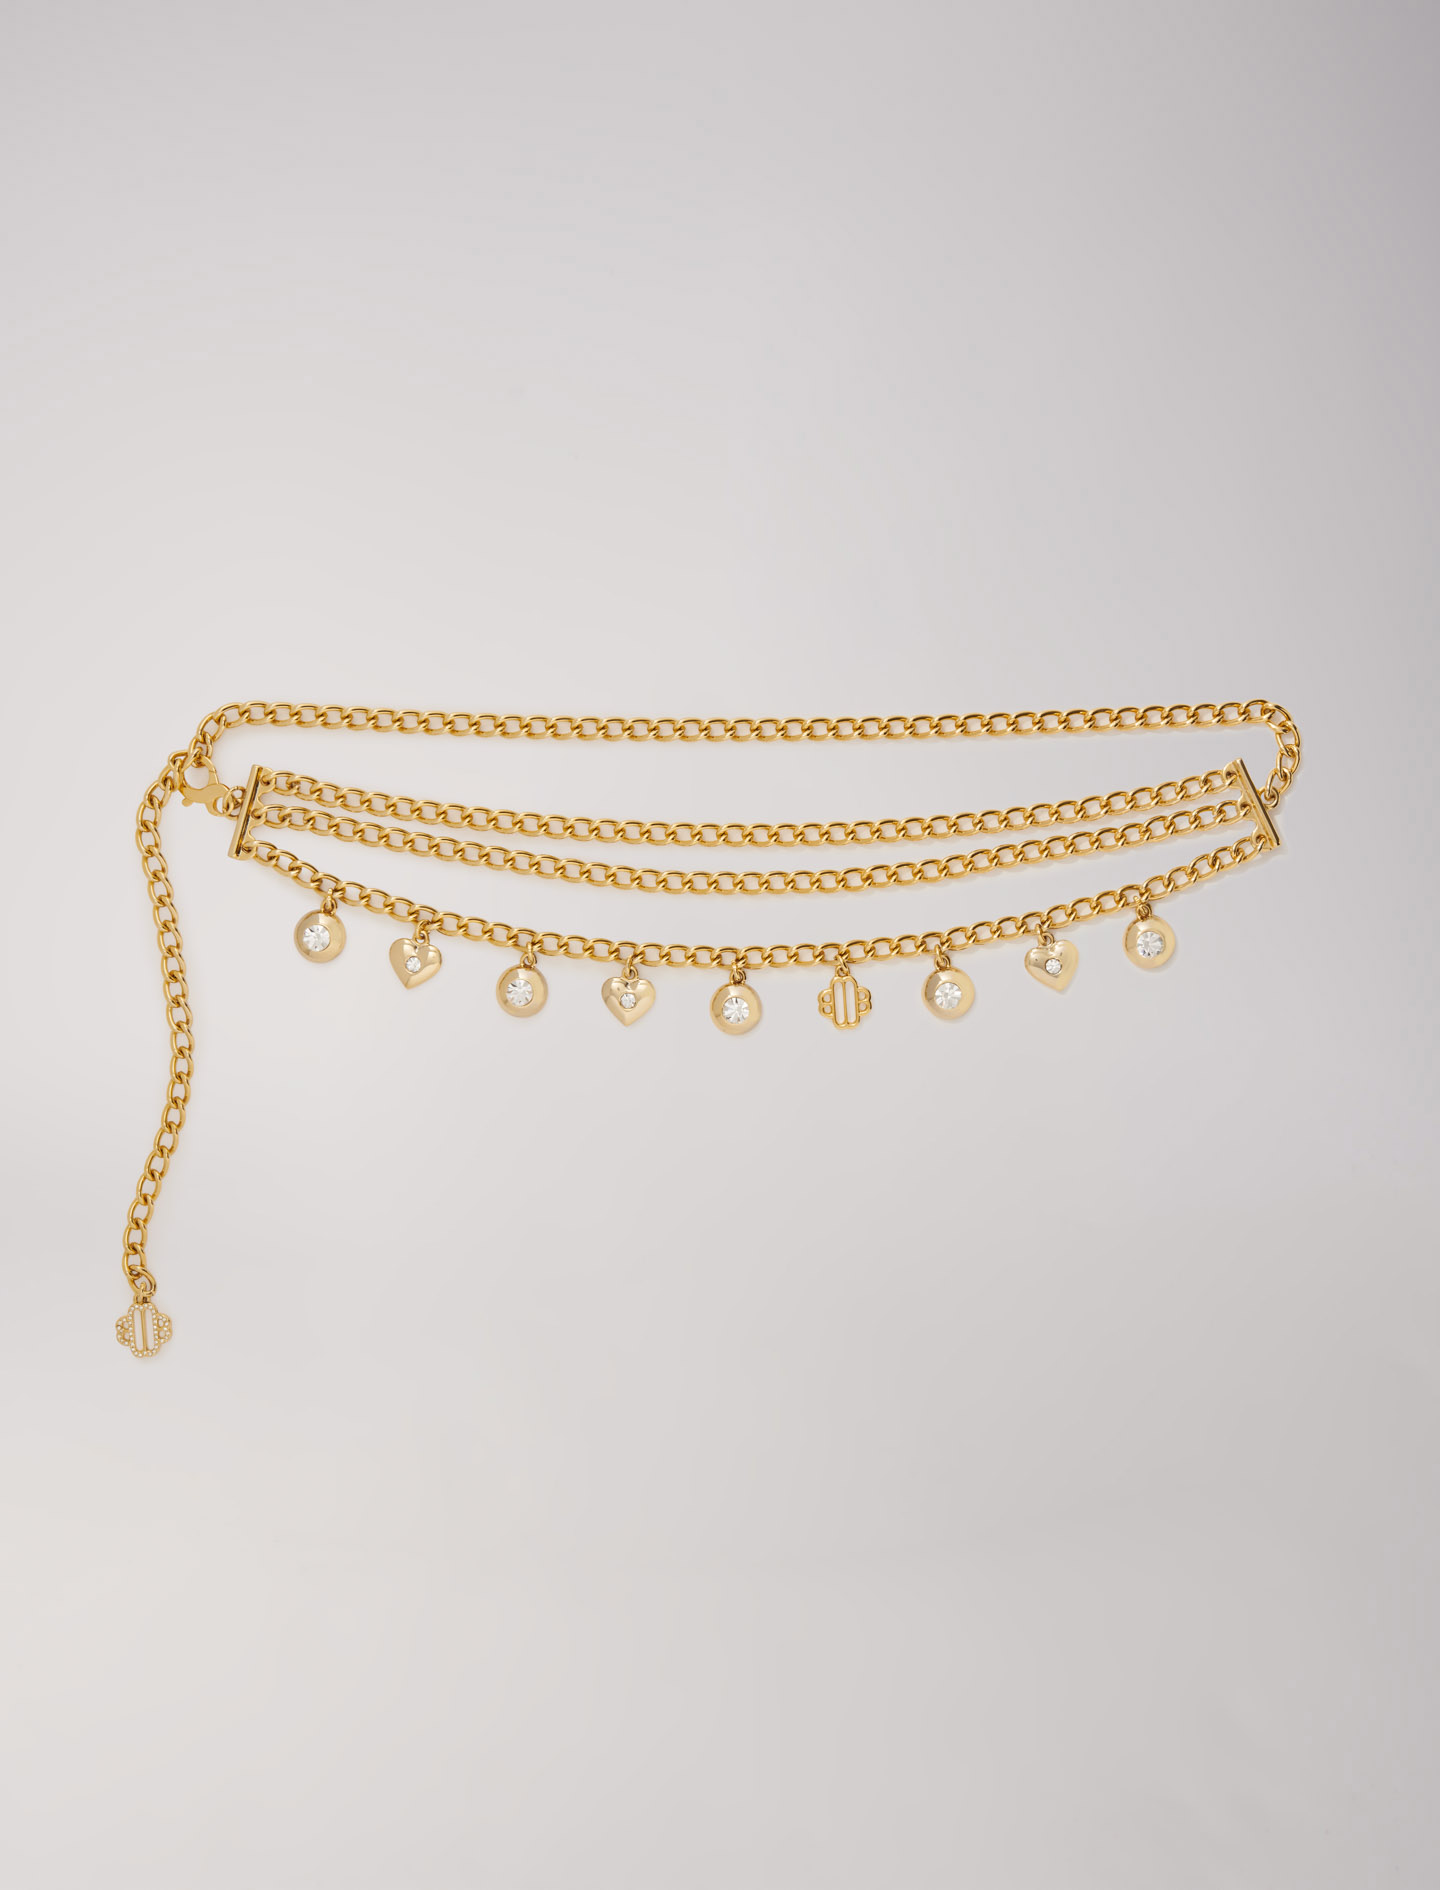 Woman's glass Accessories: Jewellery chain belt for Fall/Winter, size Woman-Belts-US L / FR 3, in color Gold / Yellow